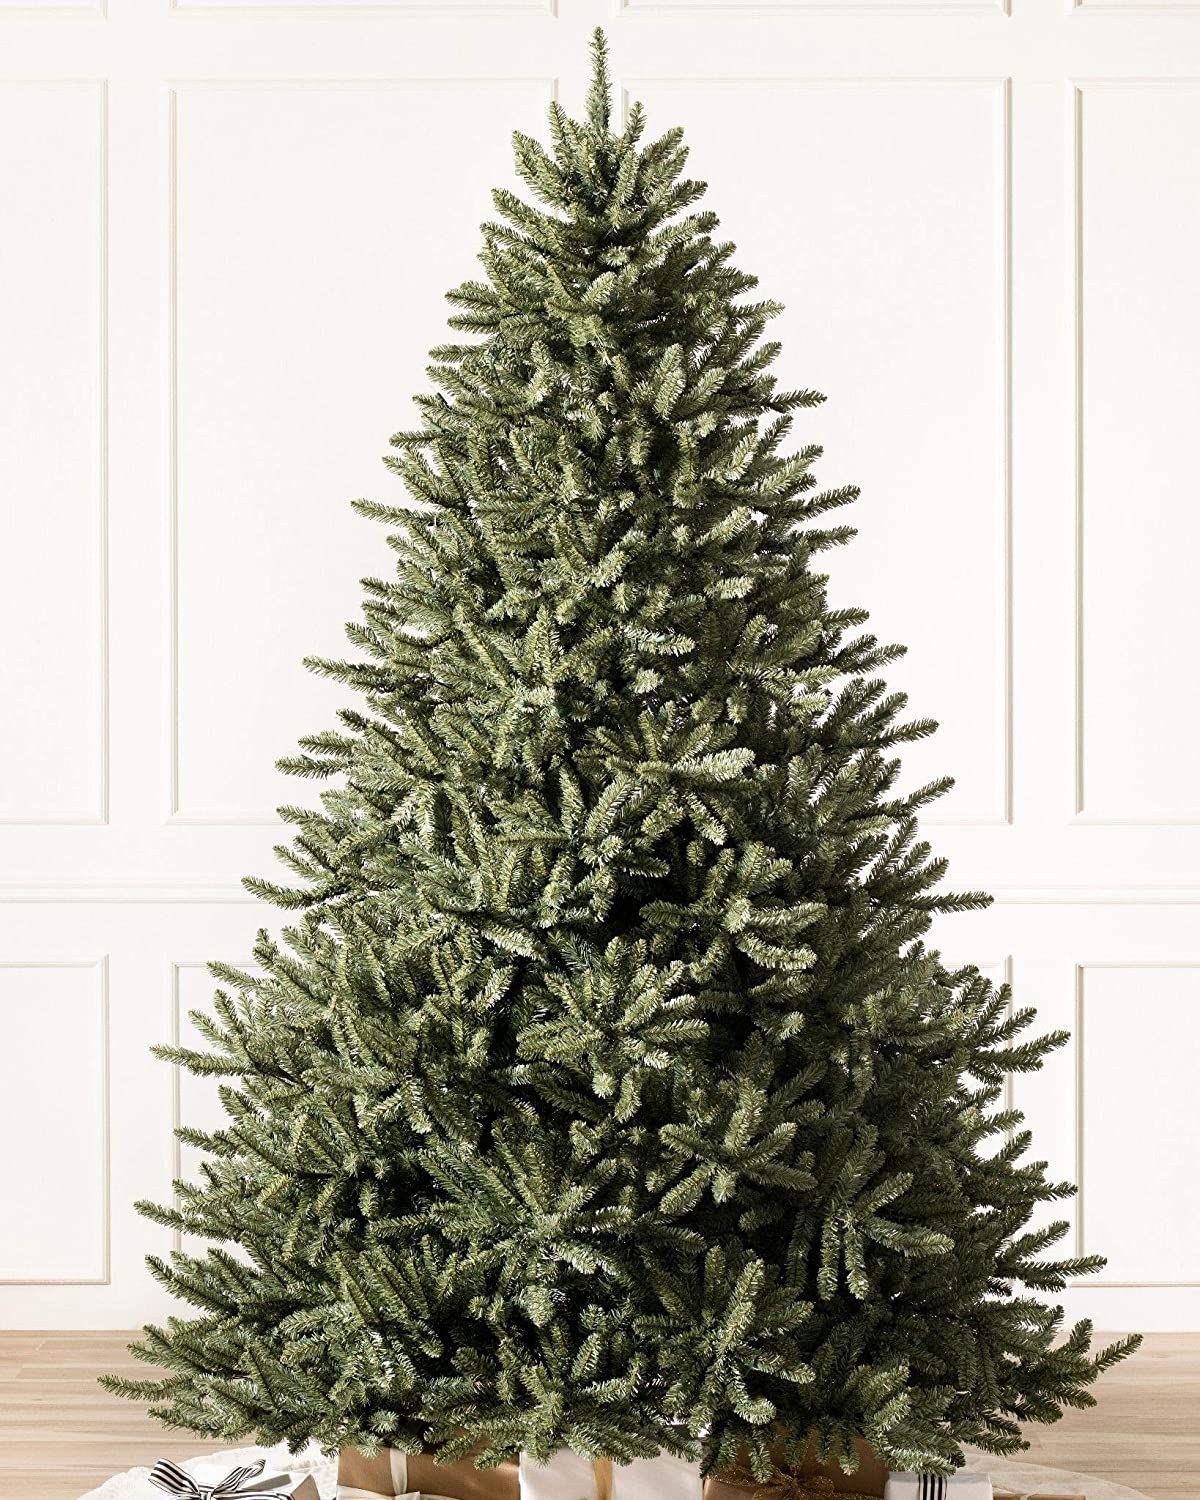 Download 20 Best Artificial Christmas Trees 2020 Fake Holiday Trees